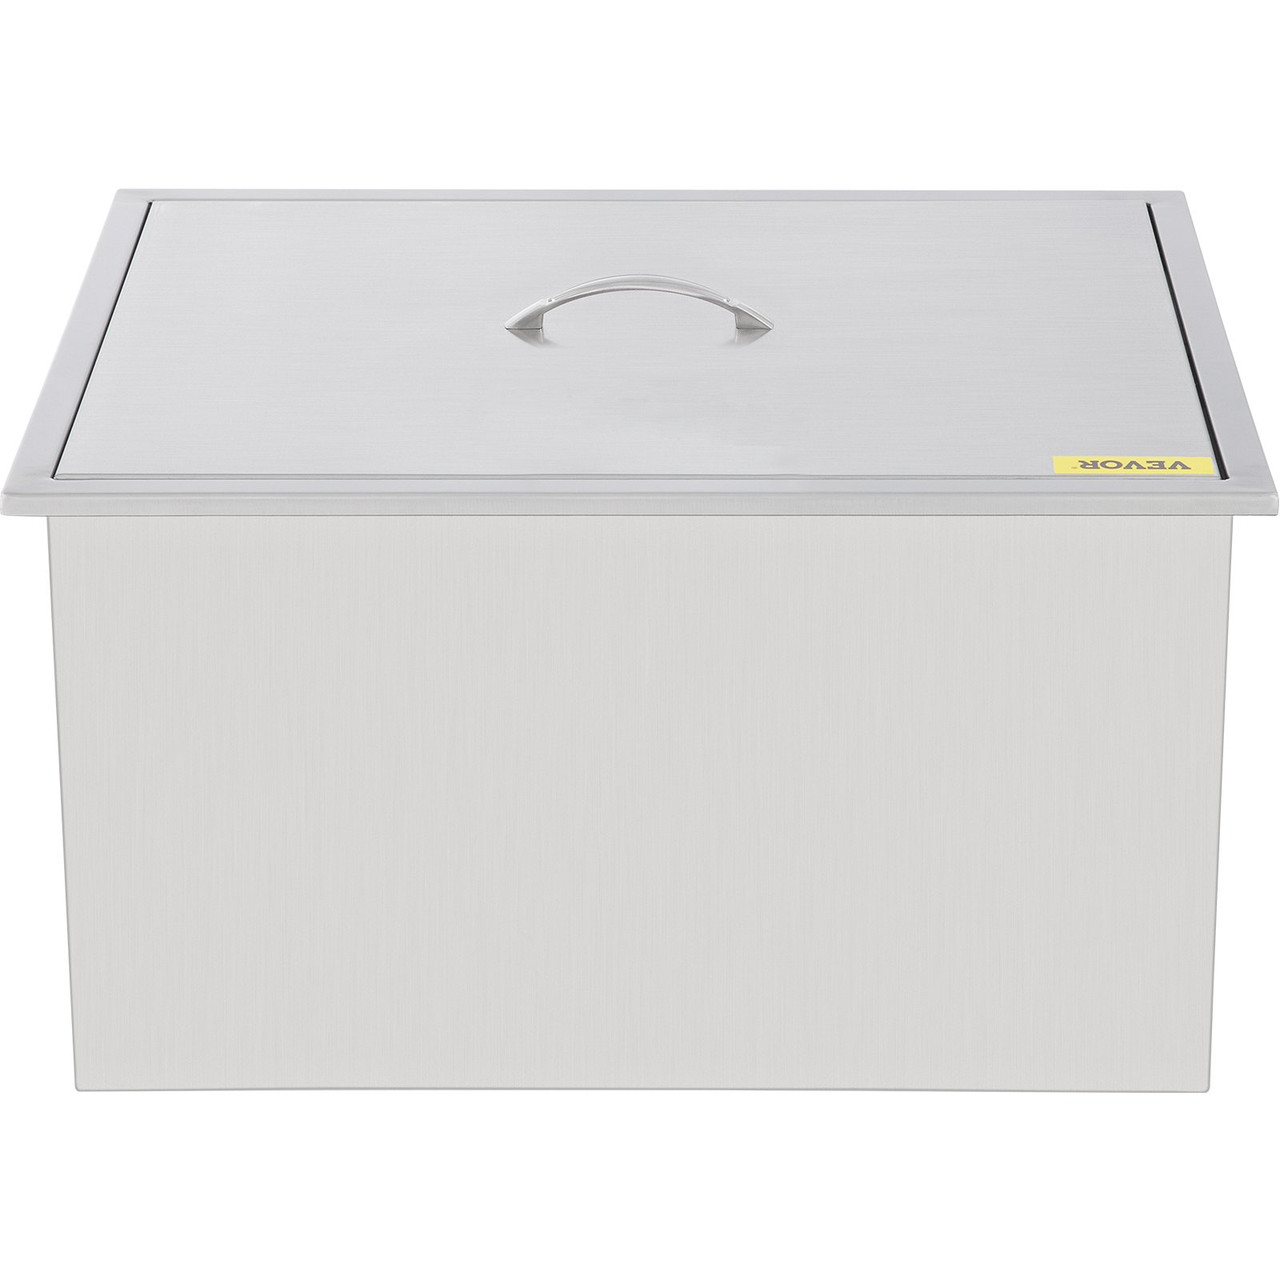 Drop in Ice Chest 23''L x 17''W x 12''H with Cover 304 Stainless Steel Drop in Cooler Included Drain-Pipe and Drain Plug Drop in Ice Bin for Cold Wine Beer